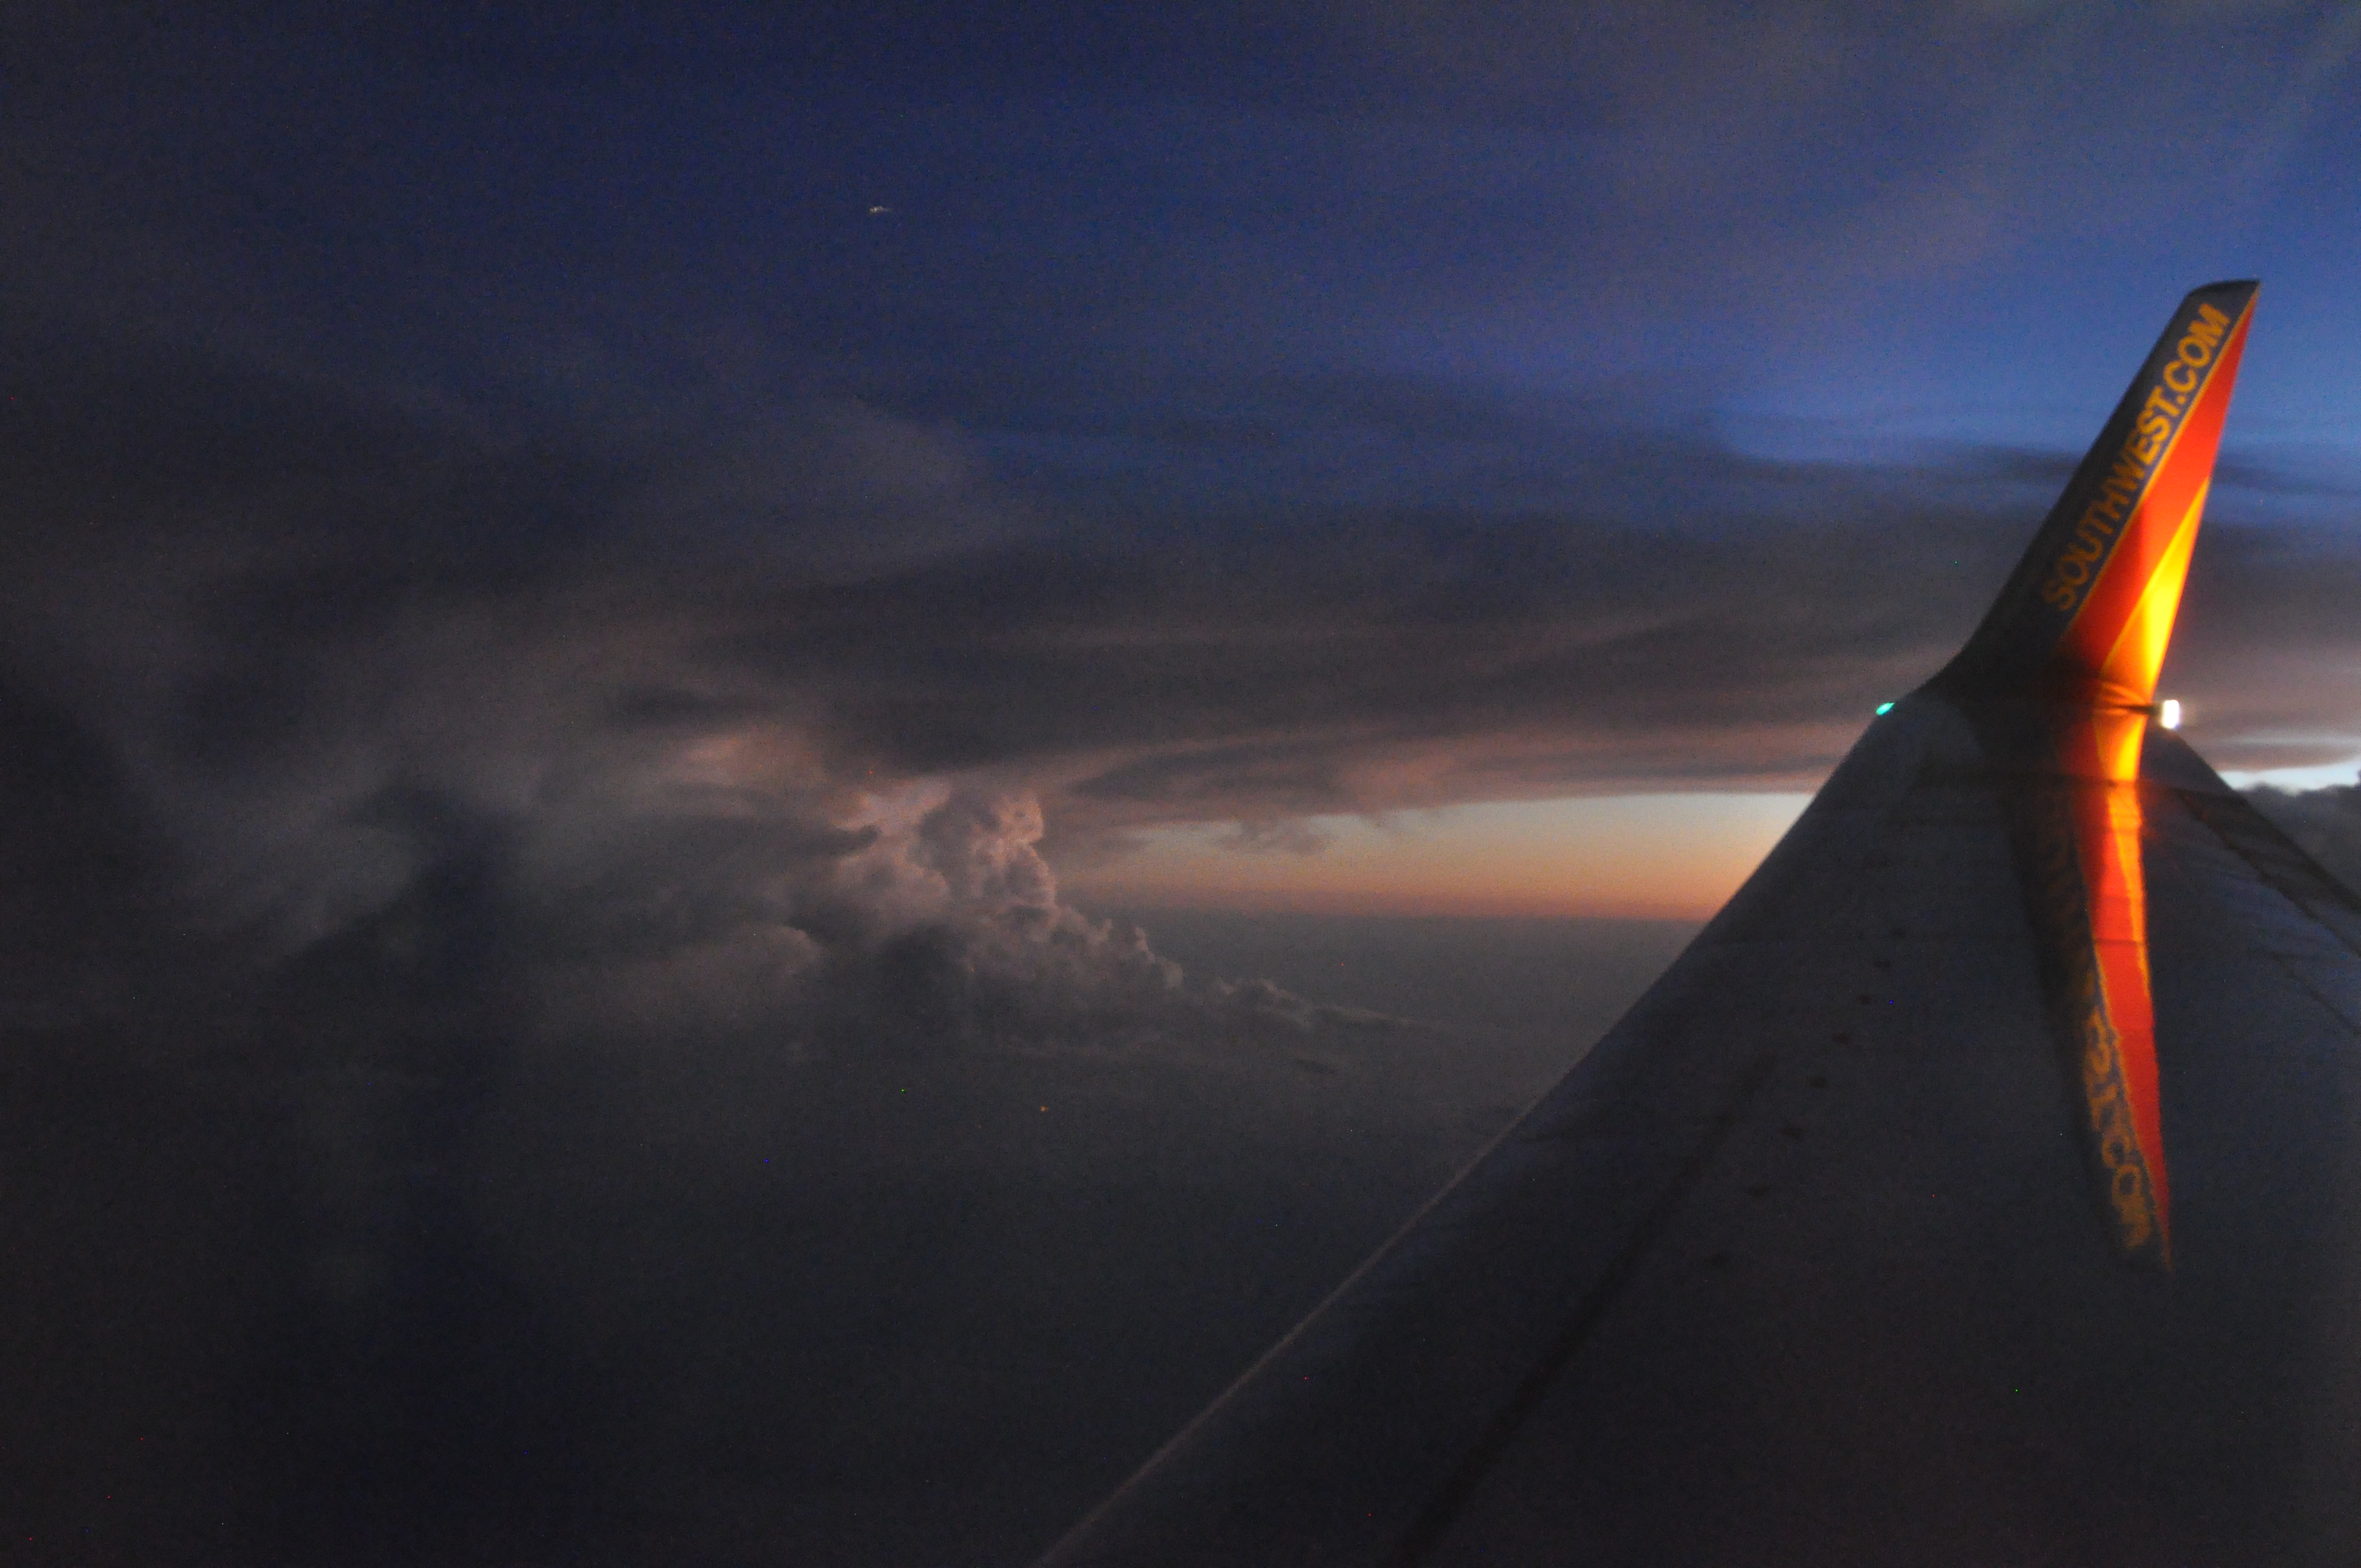 Joe Dobrow photo of clouds from a Southwest airplane